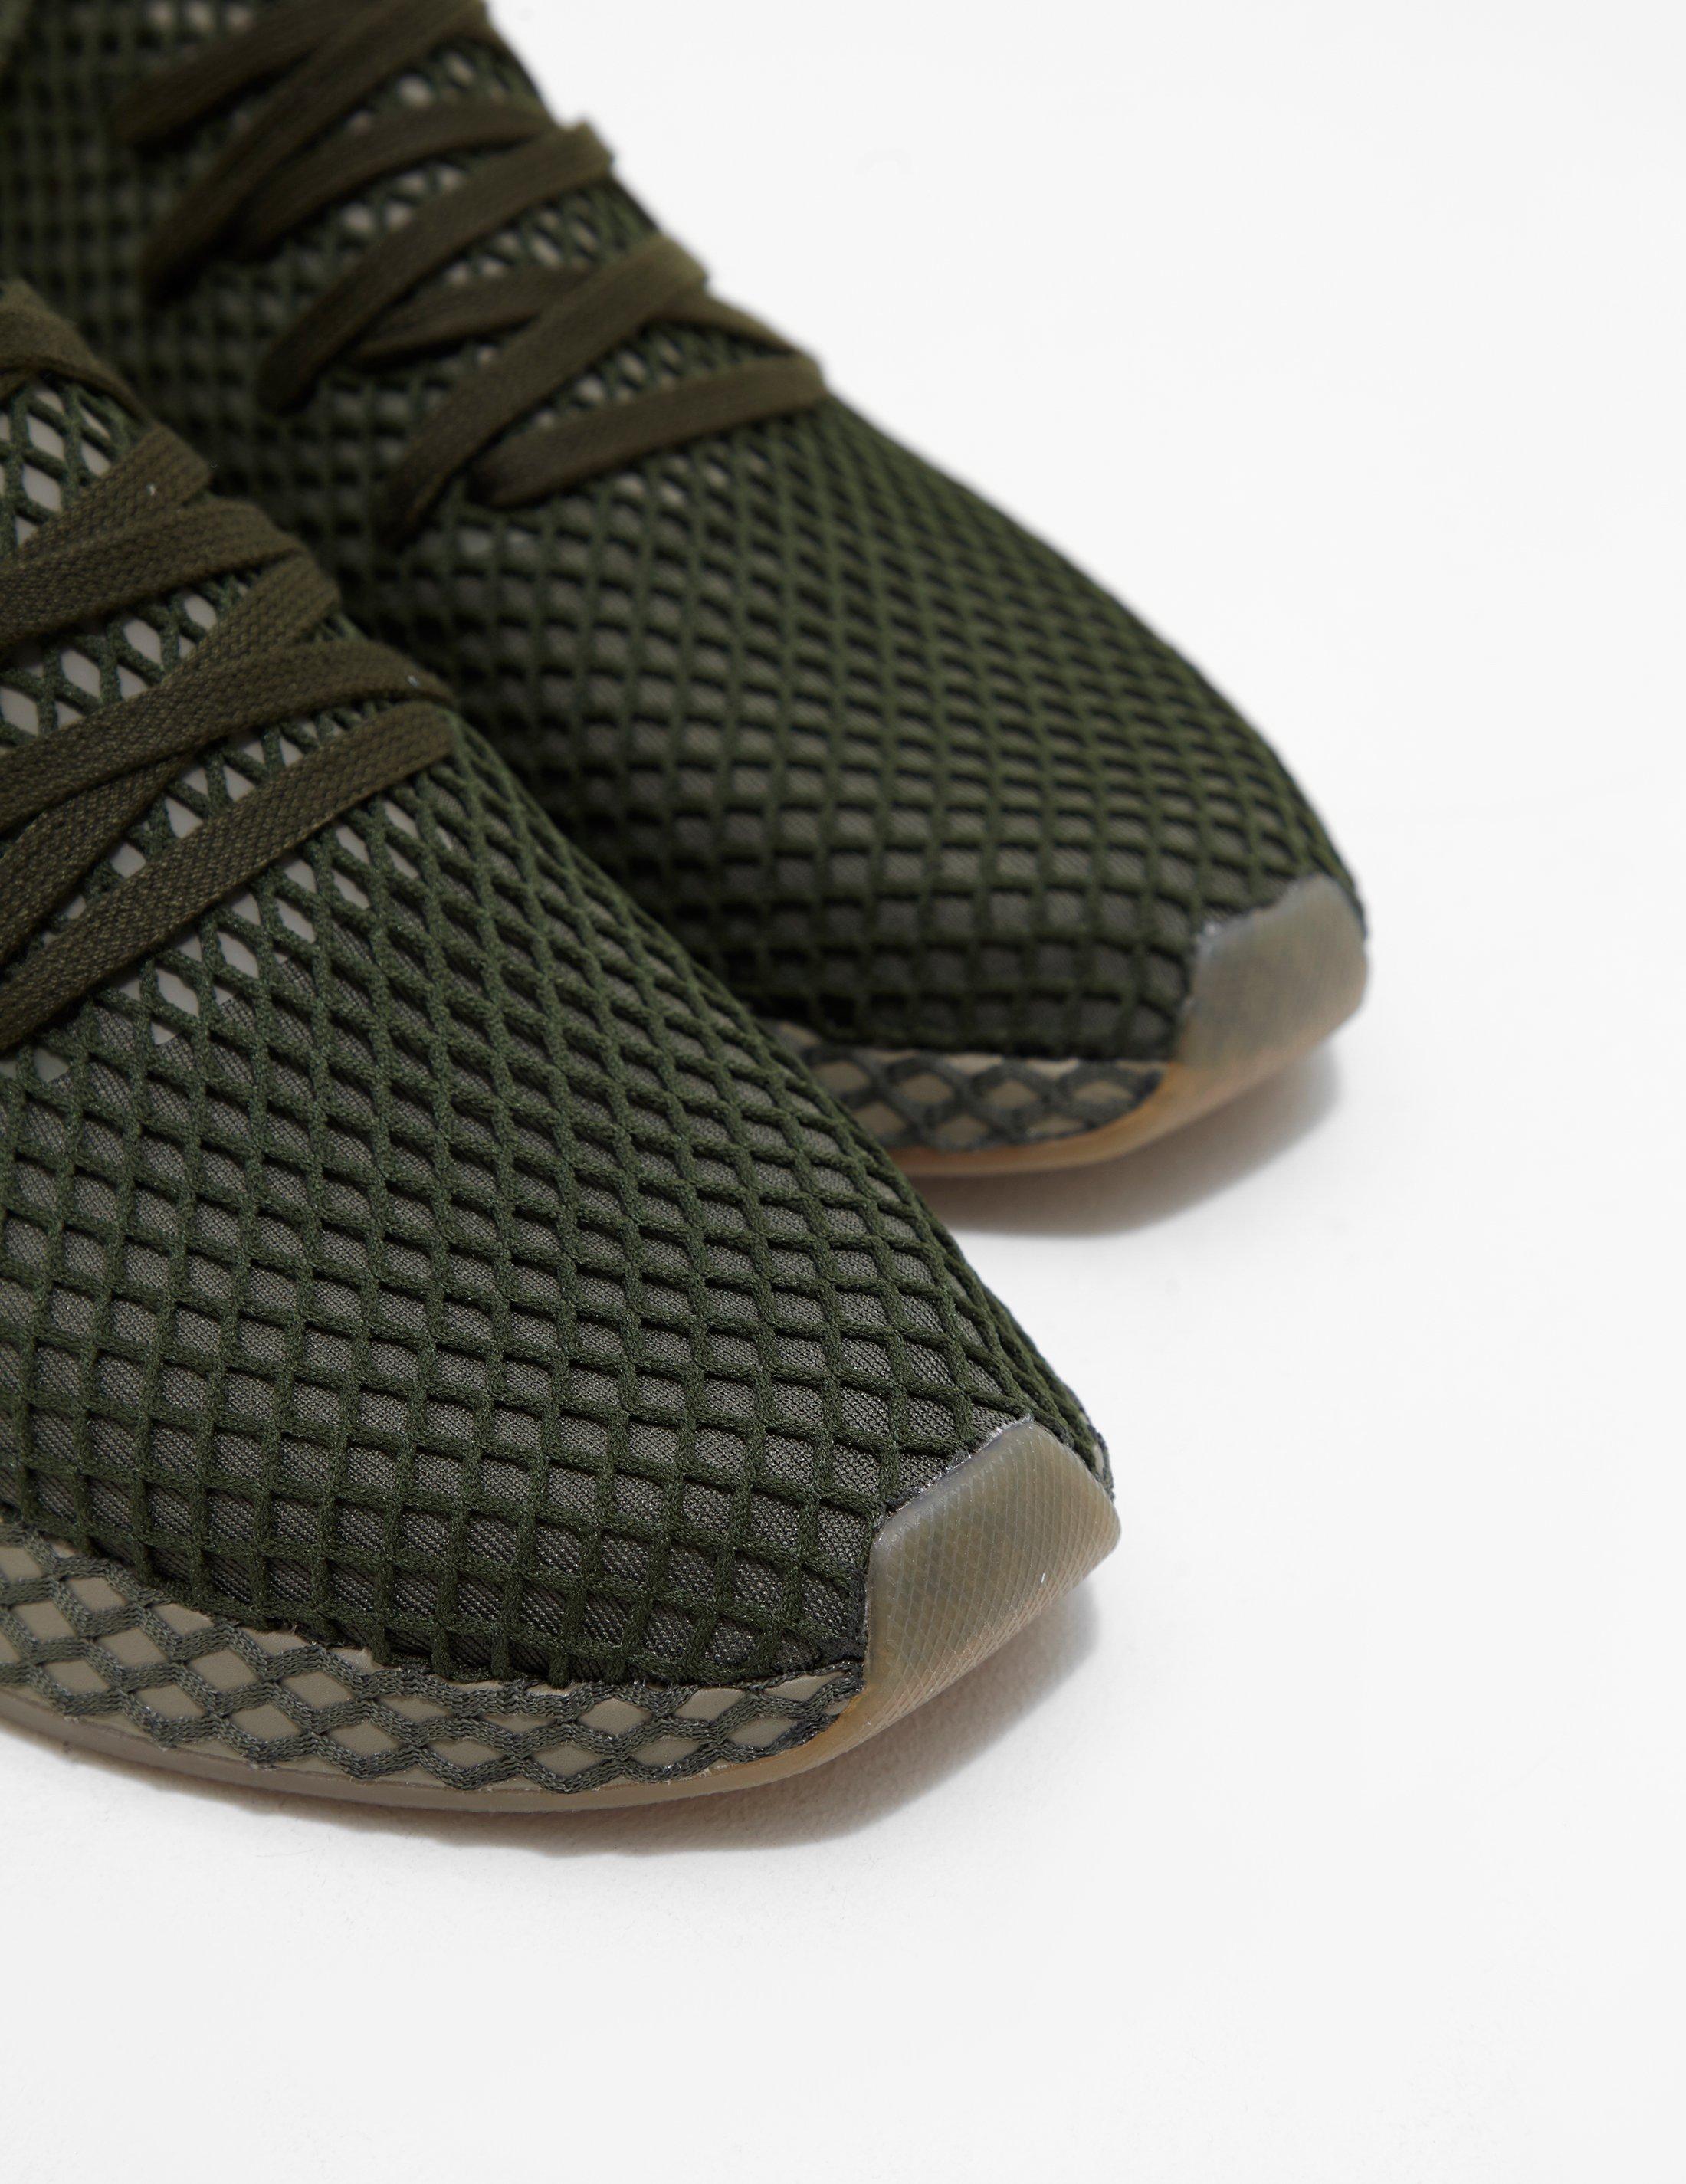 Deerupt Olive Green Hotsell, GET 50% OFF, ricettecuco.it